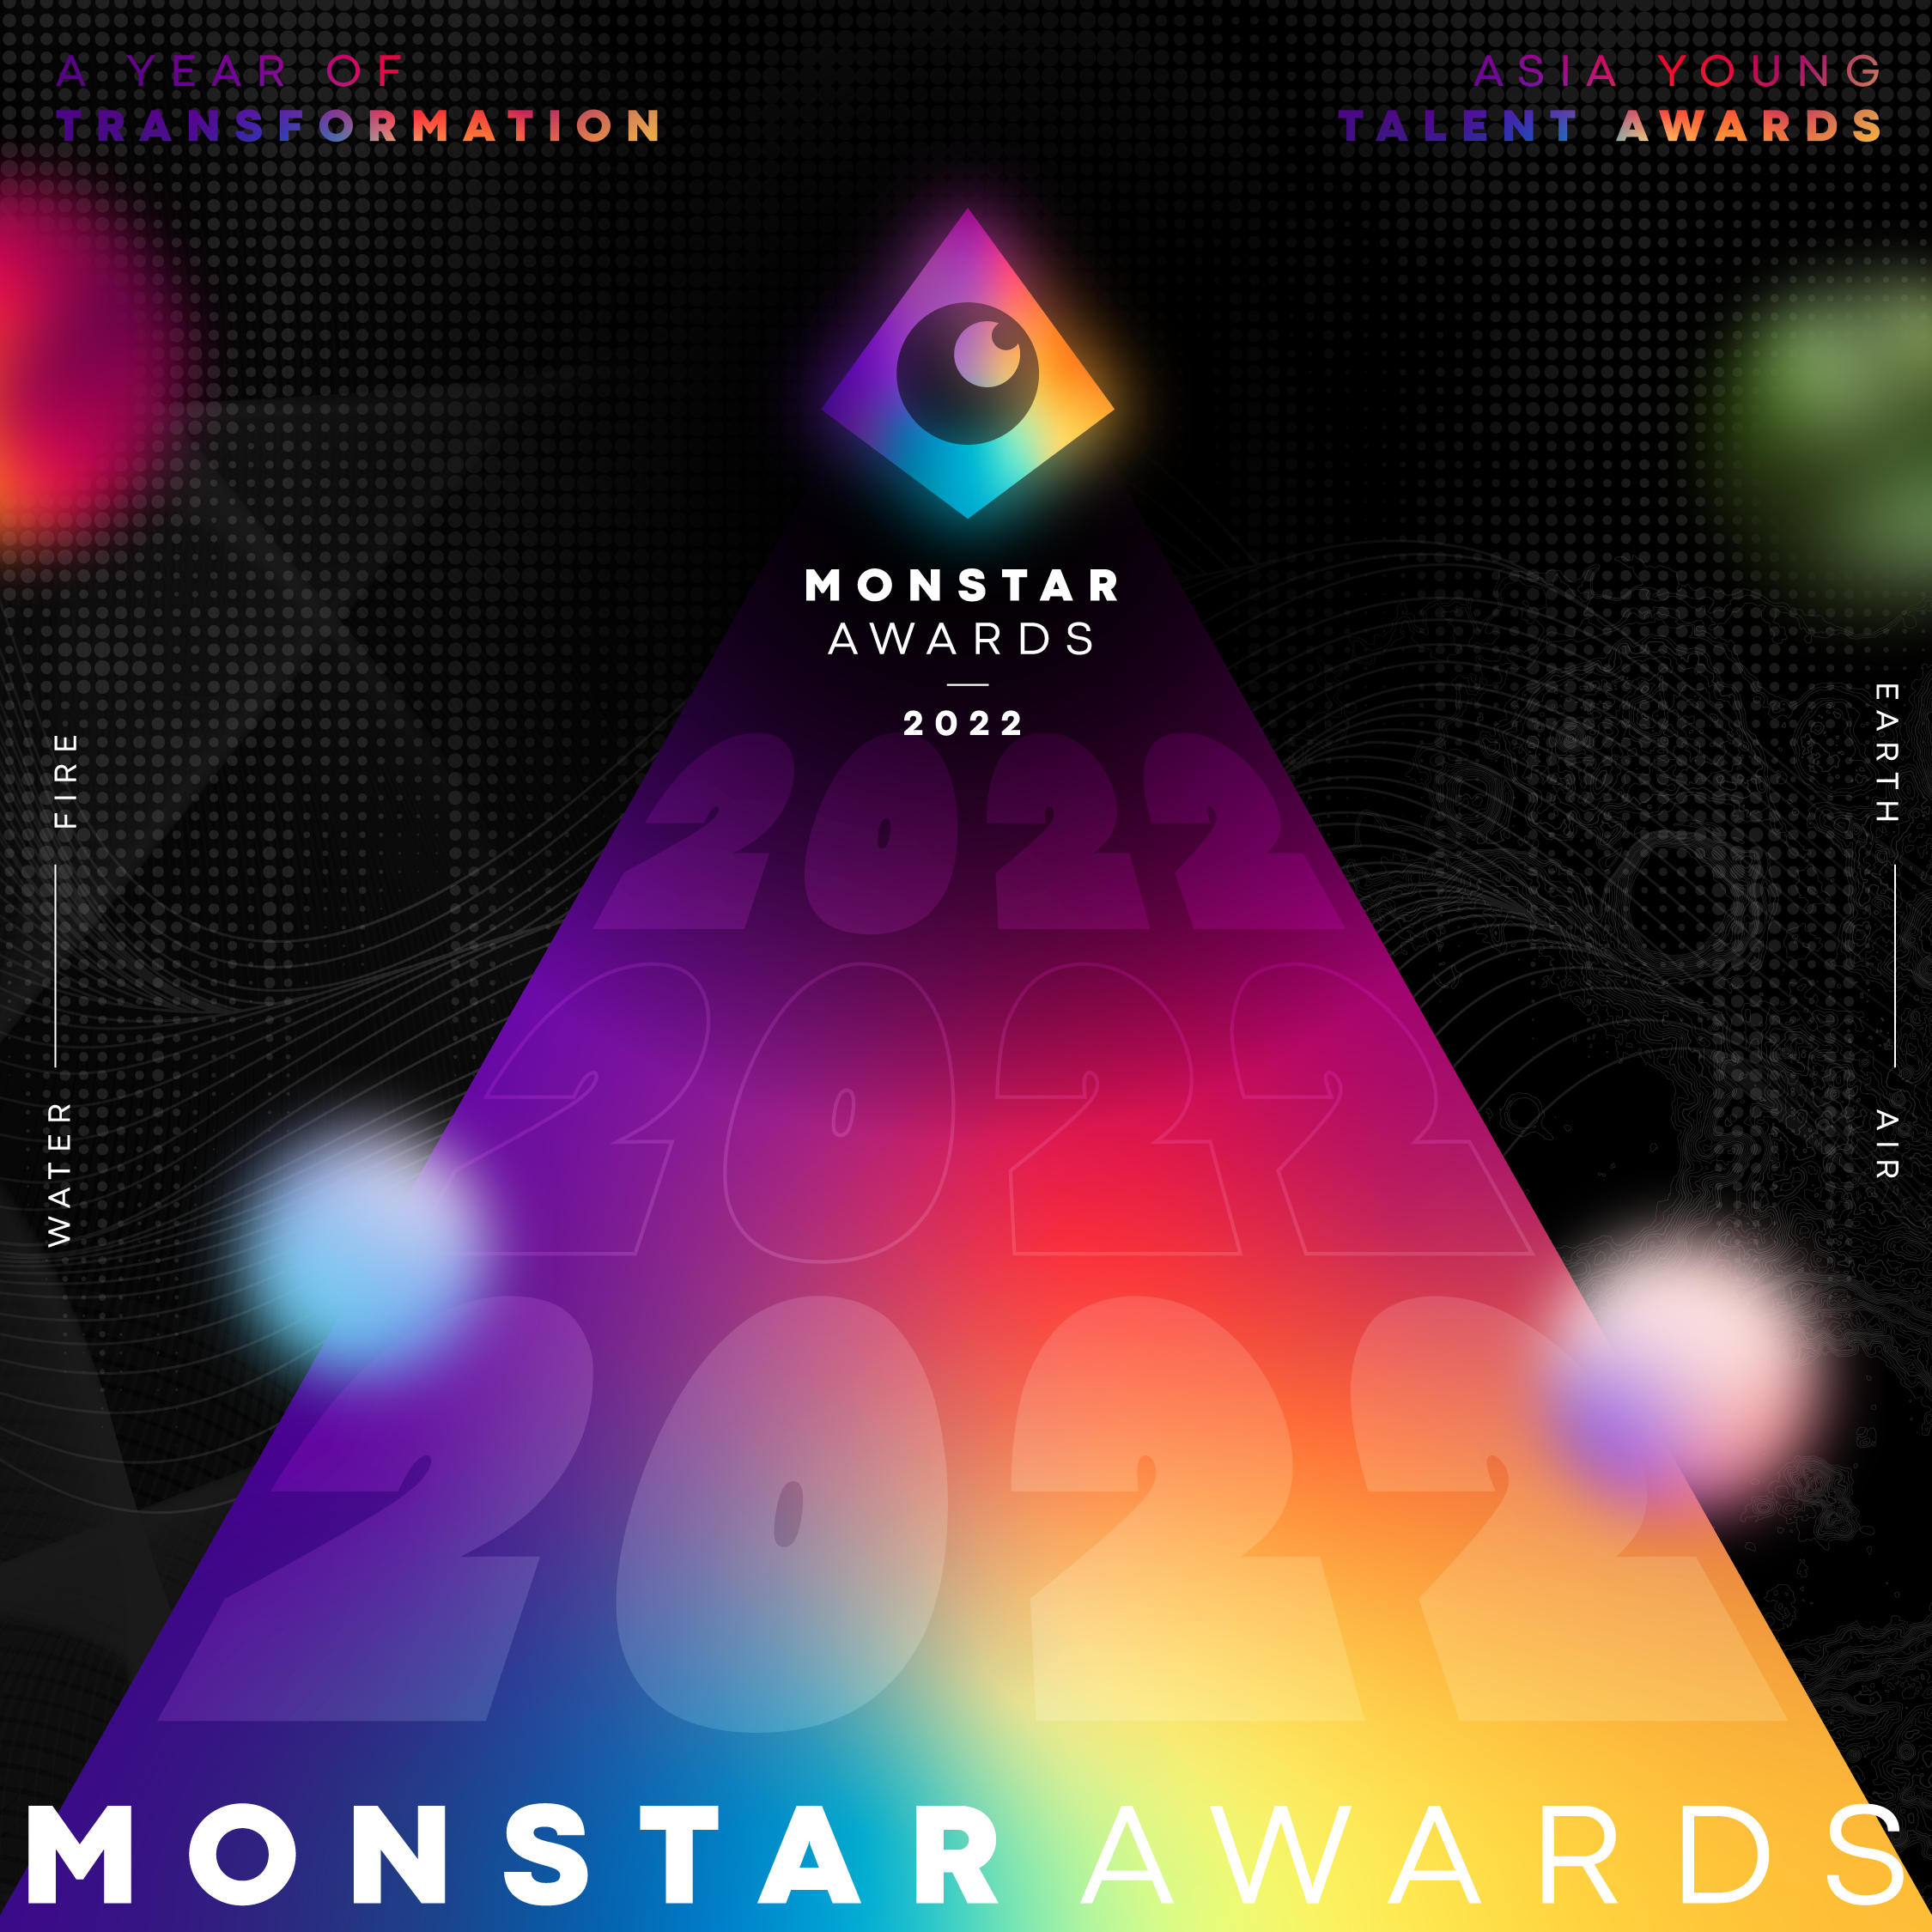 4 Elements that Change Your Life (and MonStar Awards)